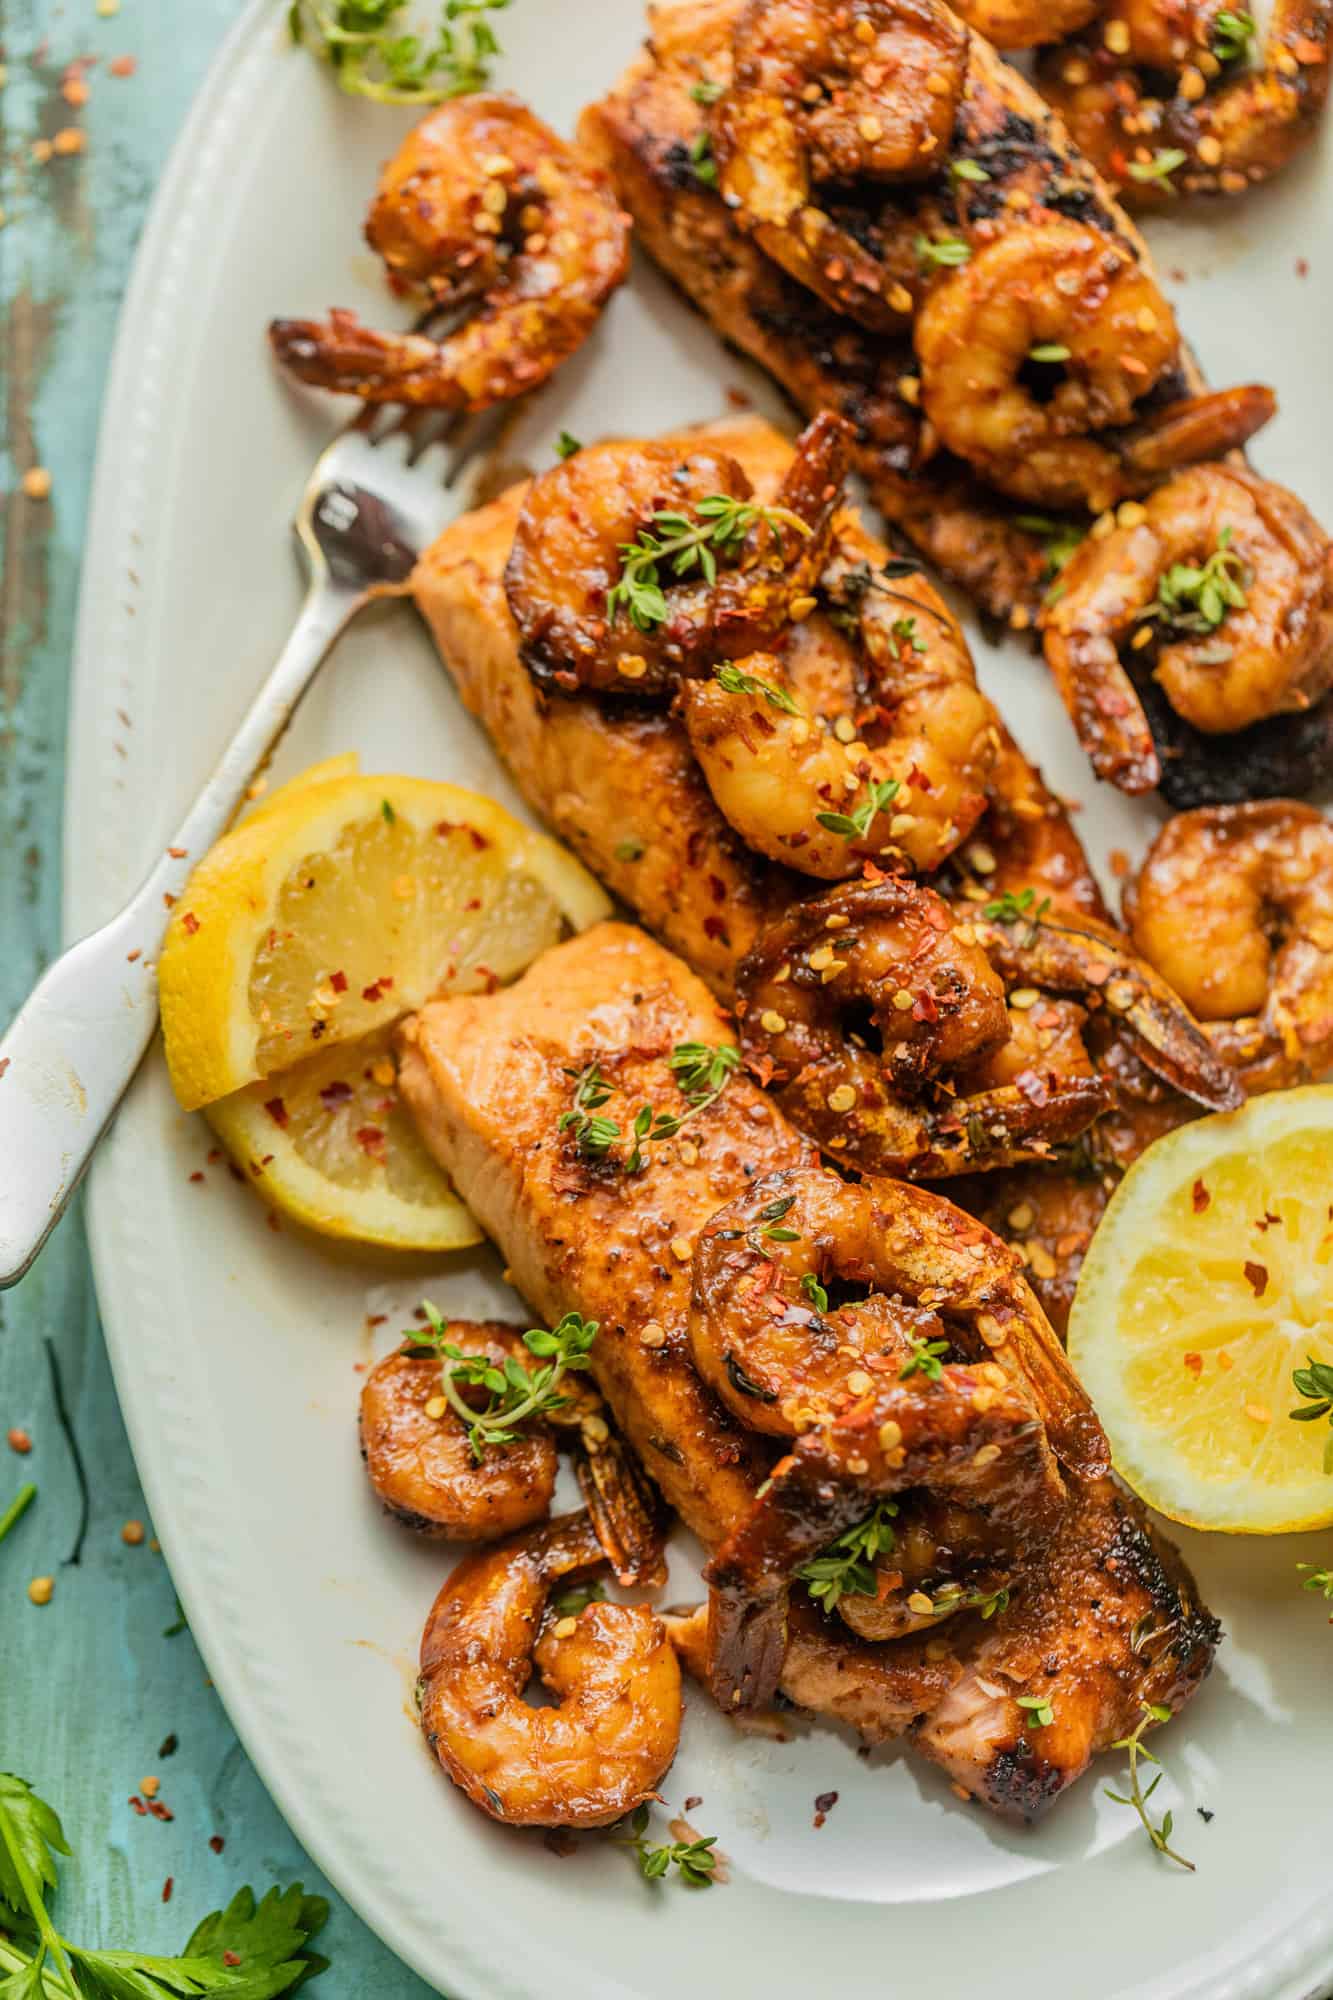 three salmon filets on a plate with lemon and shrimp